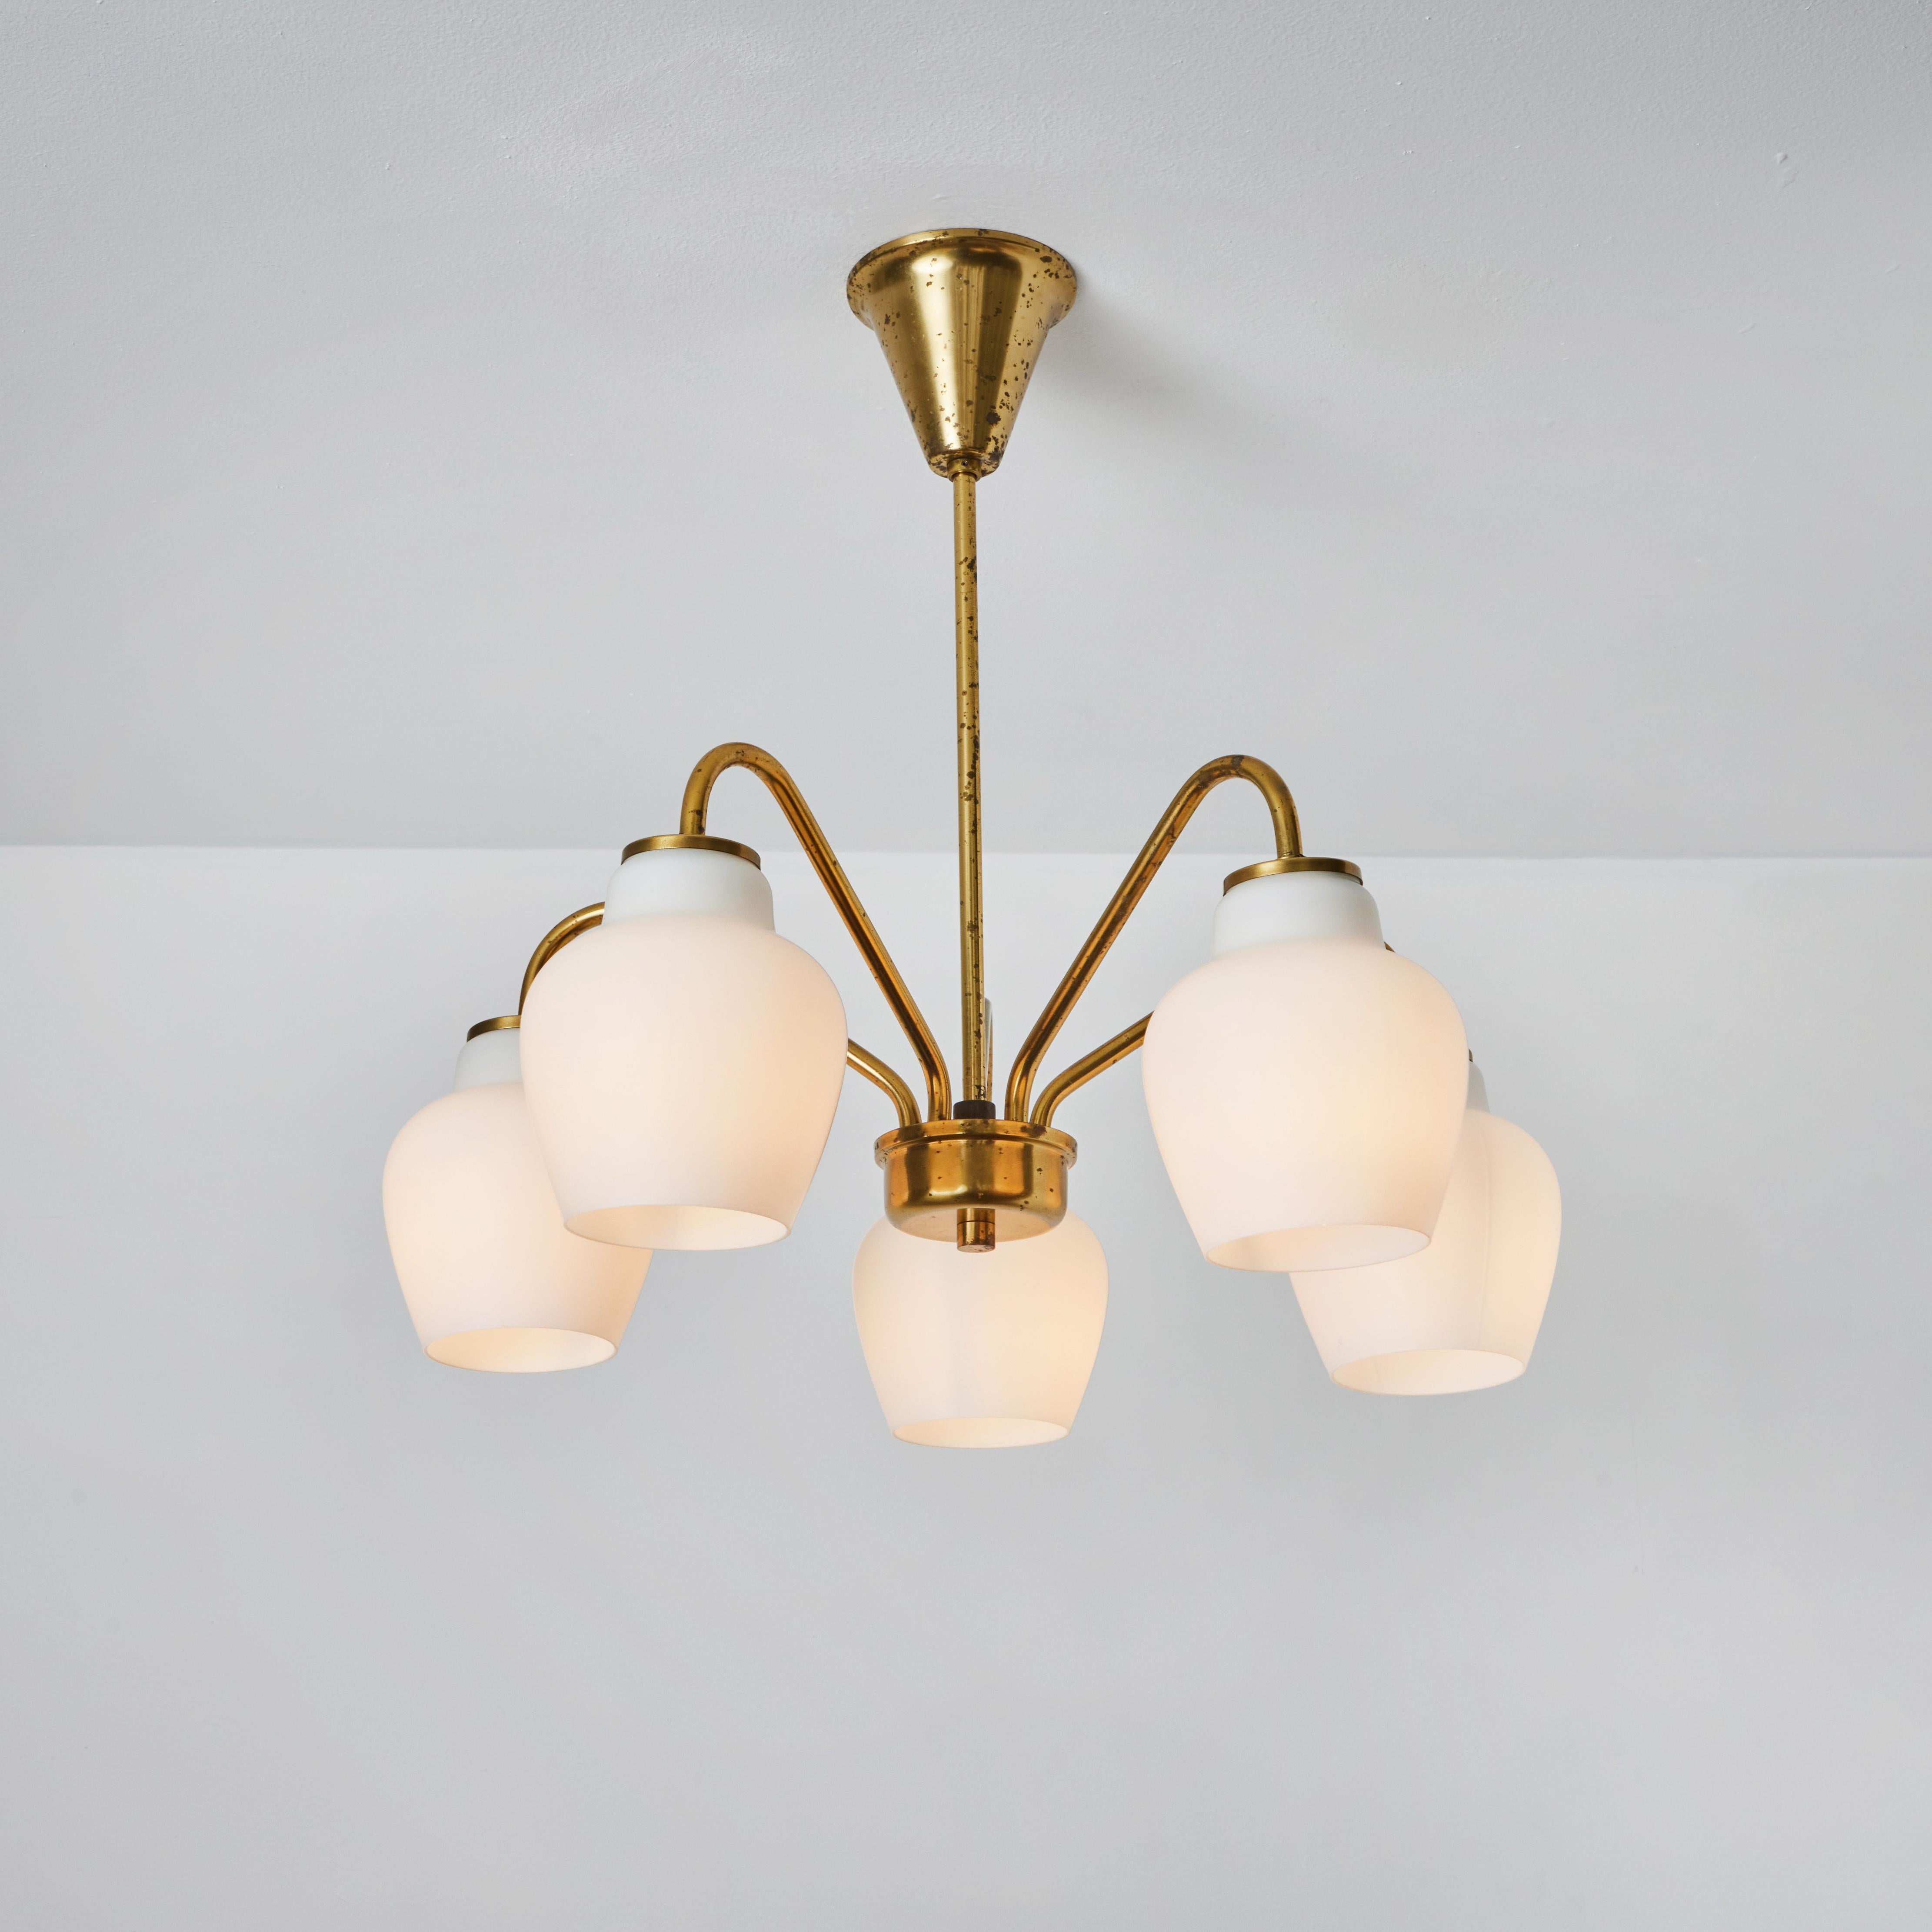 Large 1950s Bent Karlby 5-Arm Glass and Brass Chandelier for Lyfa For Sale 6